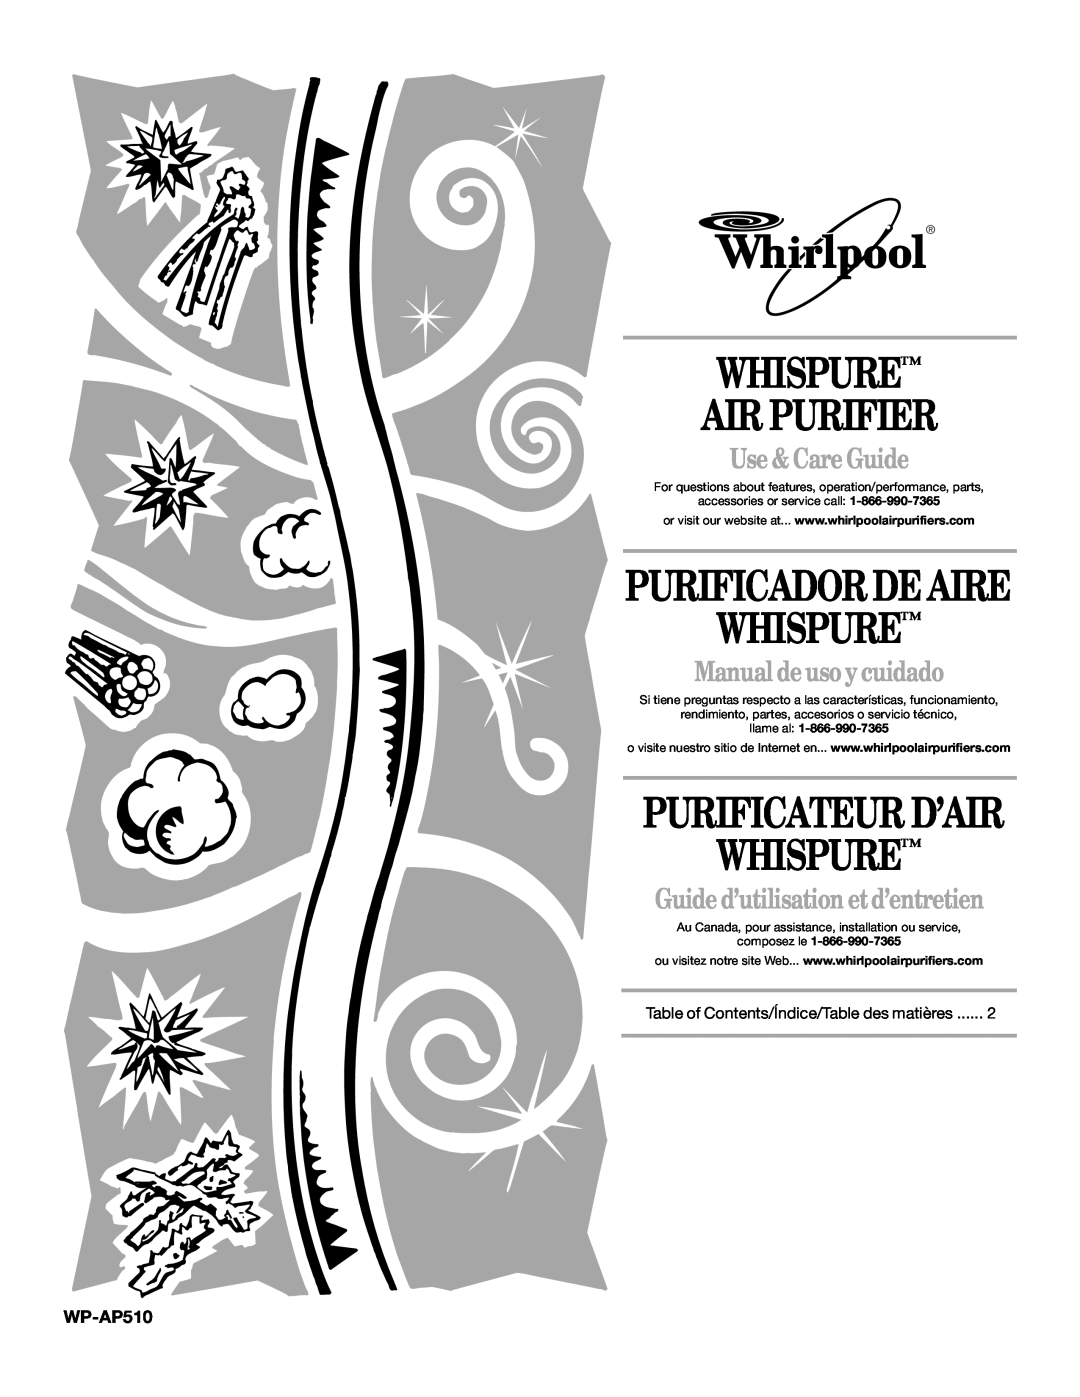 Whirlpool manual WP-AP510, Whispure Air Purifier, Purificador De Aire Whispure, Purificateur D’Air, Use & Care Guide 